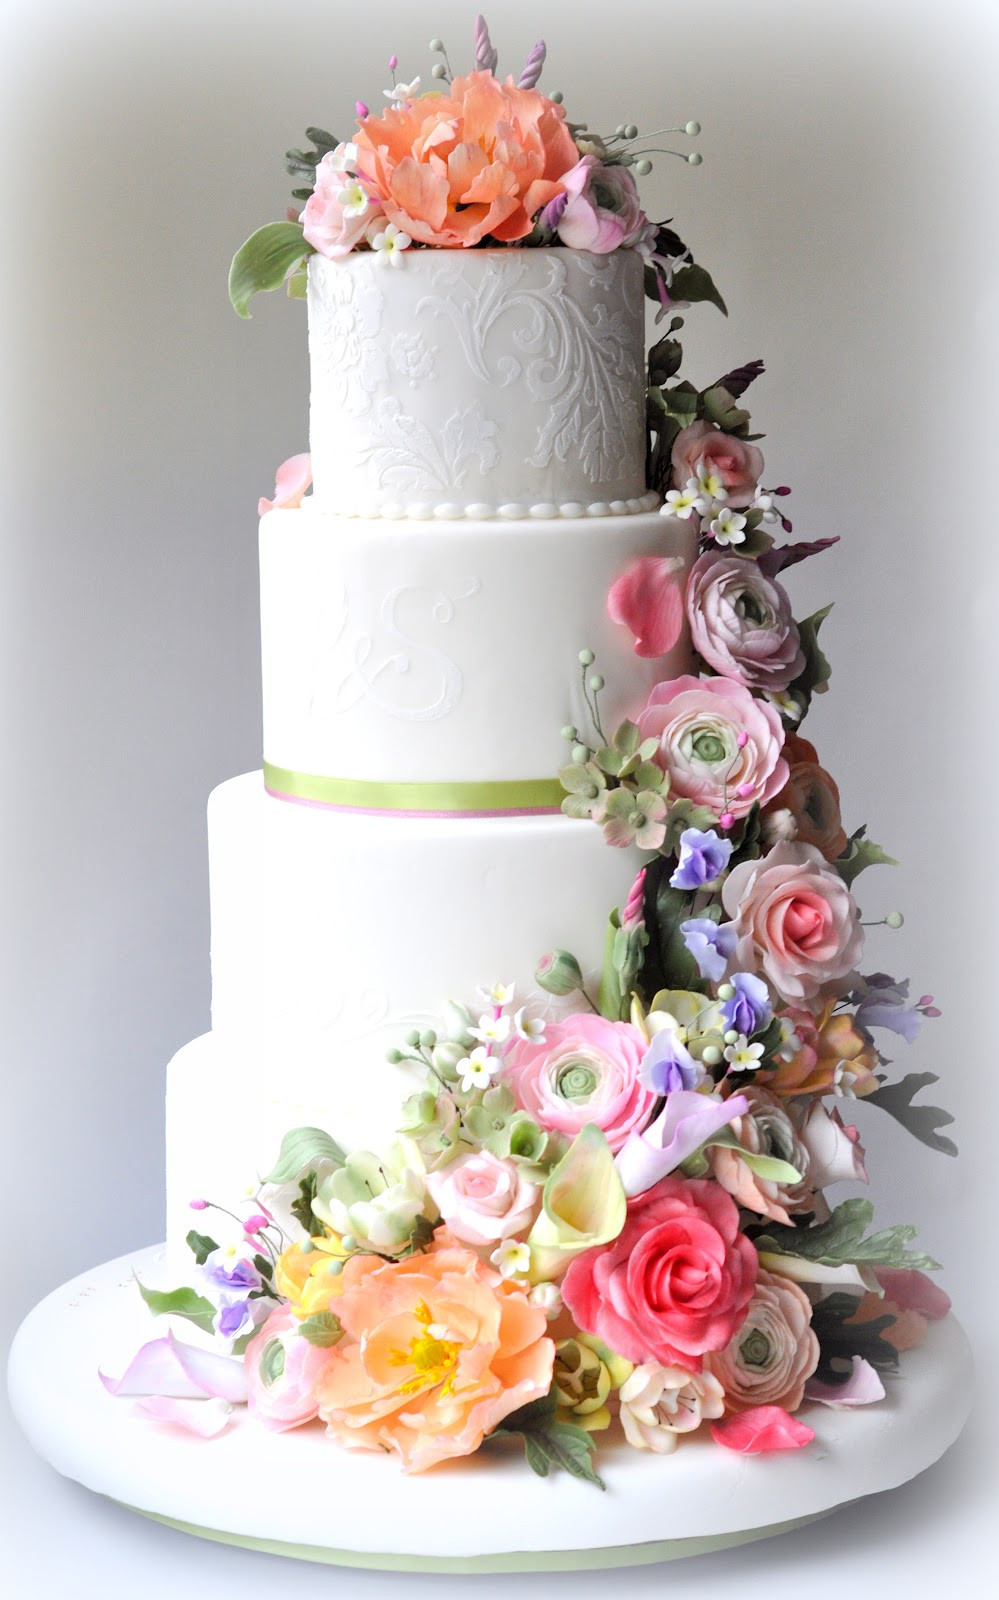 Wedding Cakes Roses
 7 Gorgeous Reasons to Fall in Love With Spring Weddings